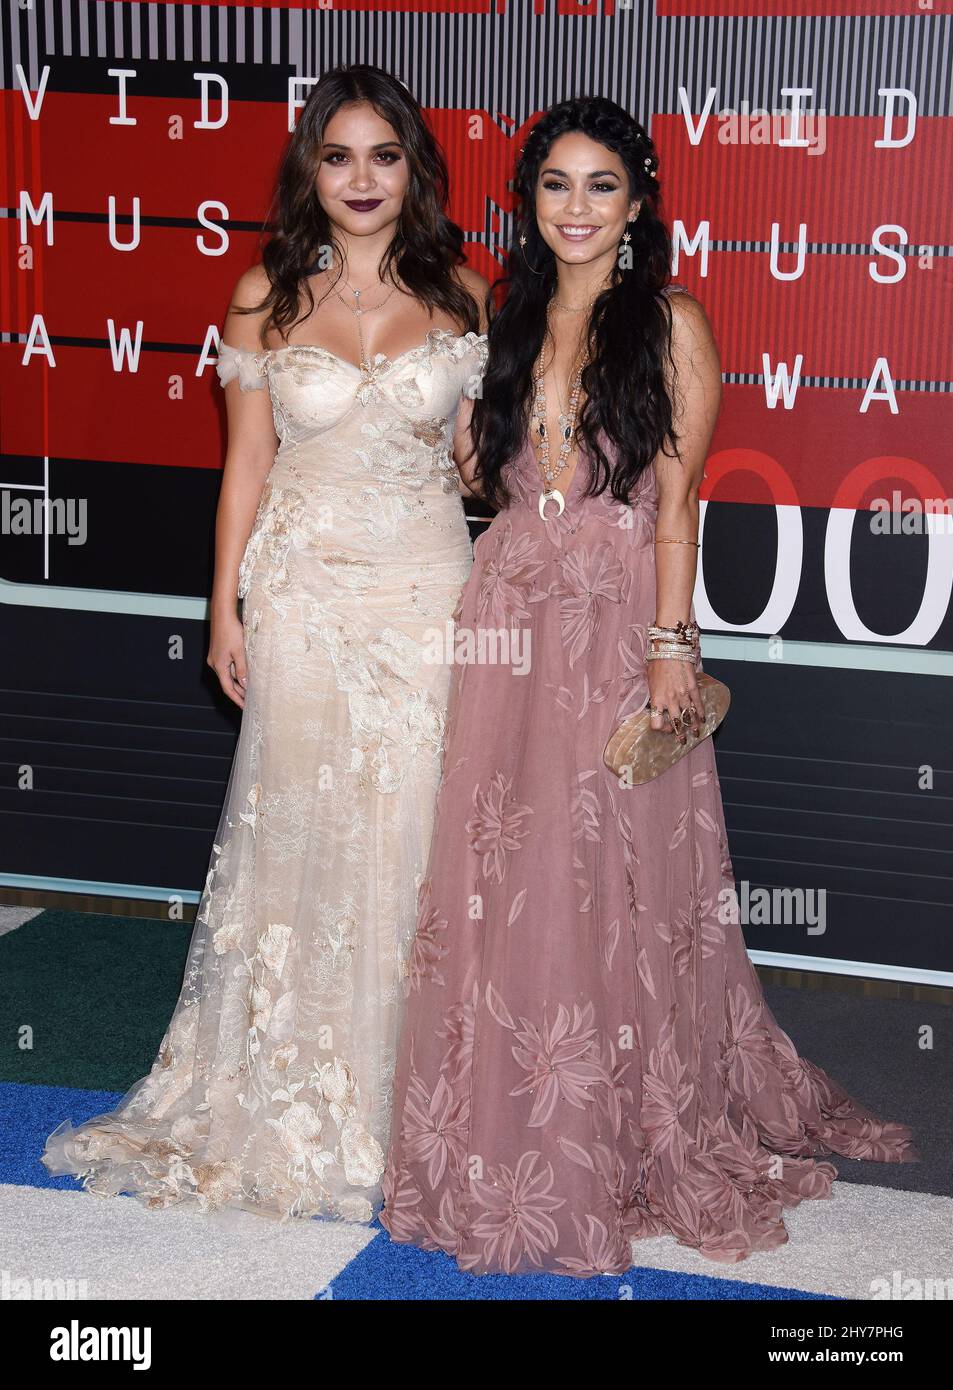 Vanessa Hudgens, Stella Hudgens arriving on the red carpet at the MTV Video Music Awards 2015, at the Microsoft Theatre, Los Angeles. Stock Photo